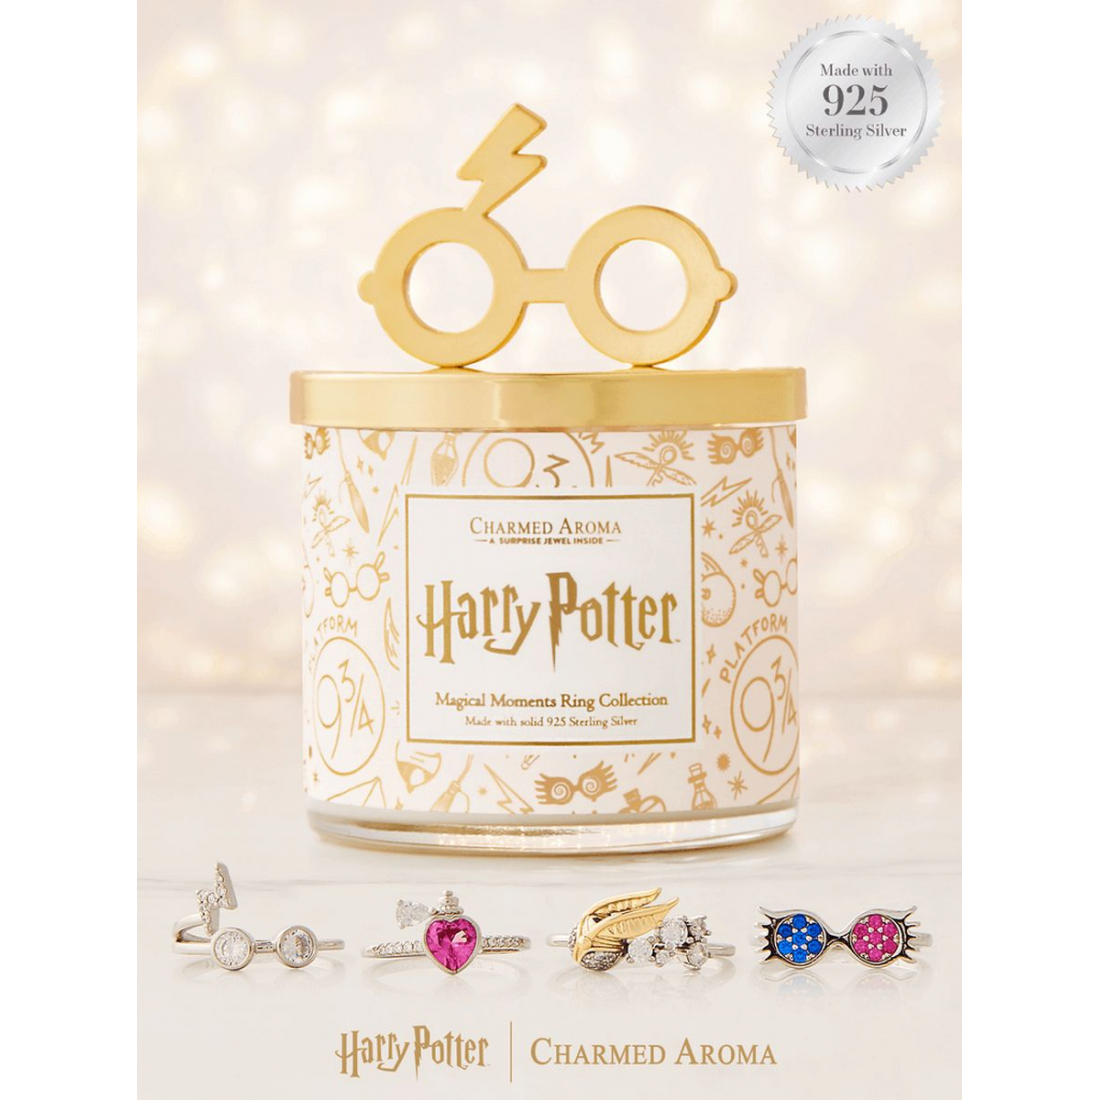 Women's 'Harry Potter Magical Moments' Candle Set - 500 g